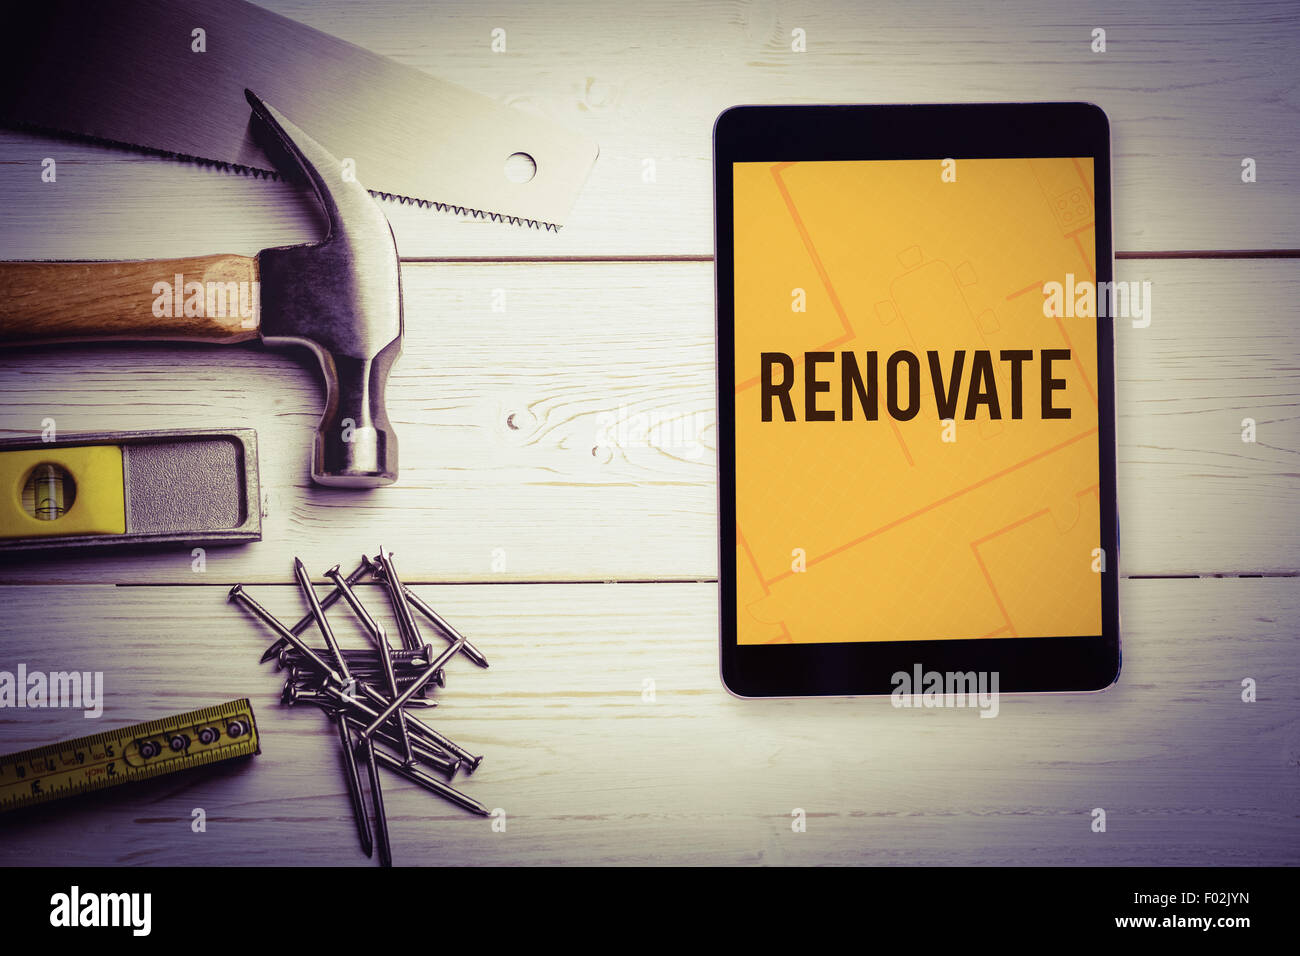 Renovate  against tablet displaying blueprint Stock Photo